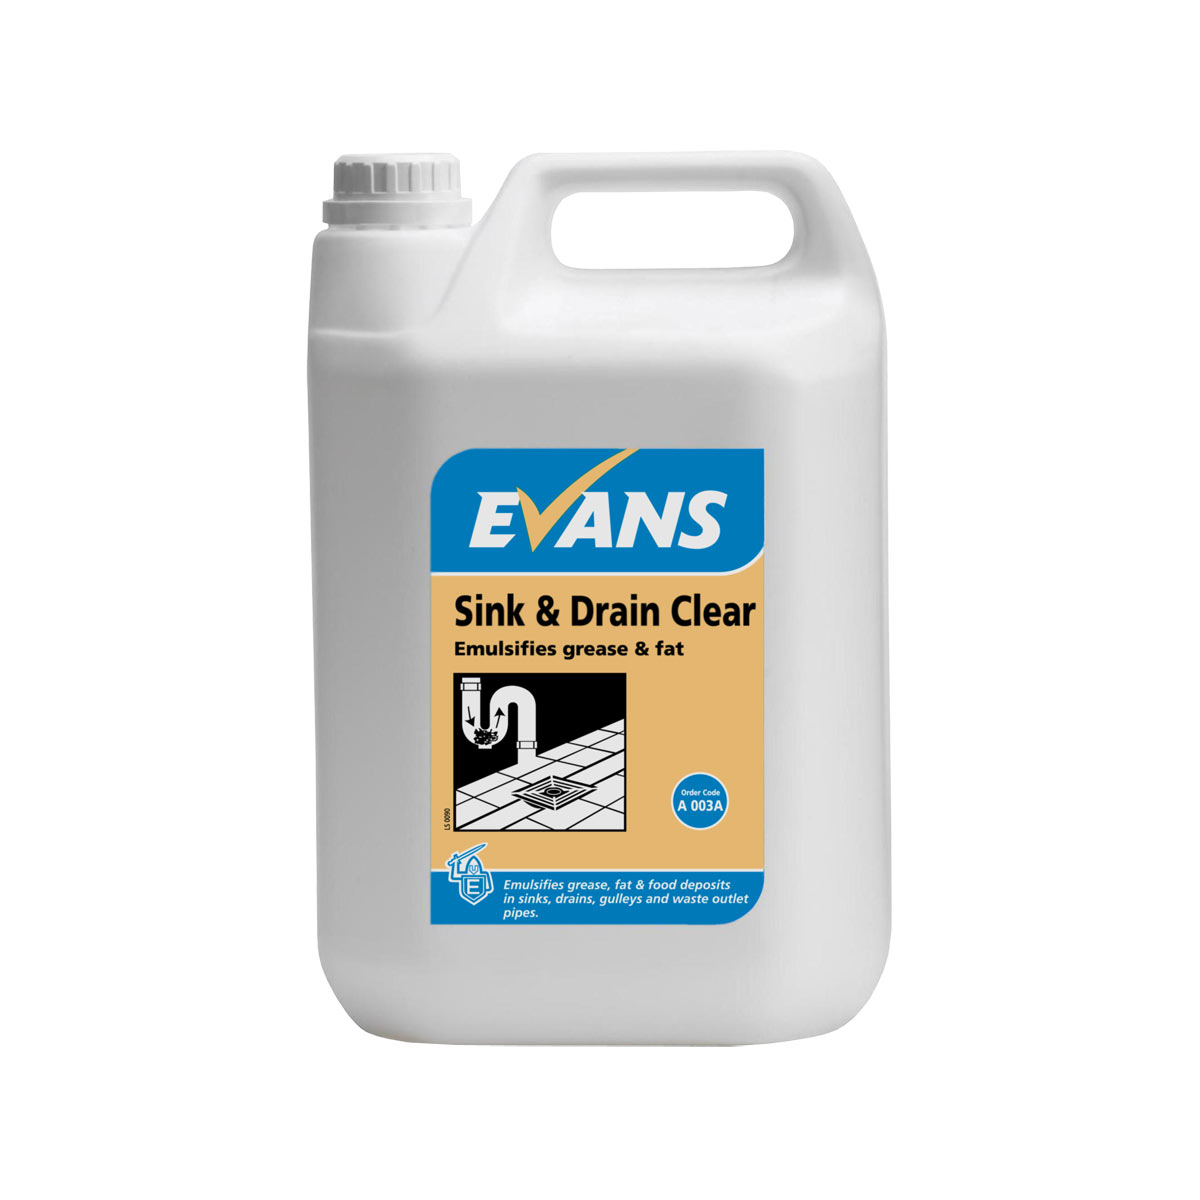 Sink & Drain Clear - Grease and Fat Emulsifier